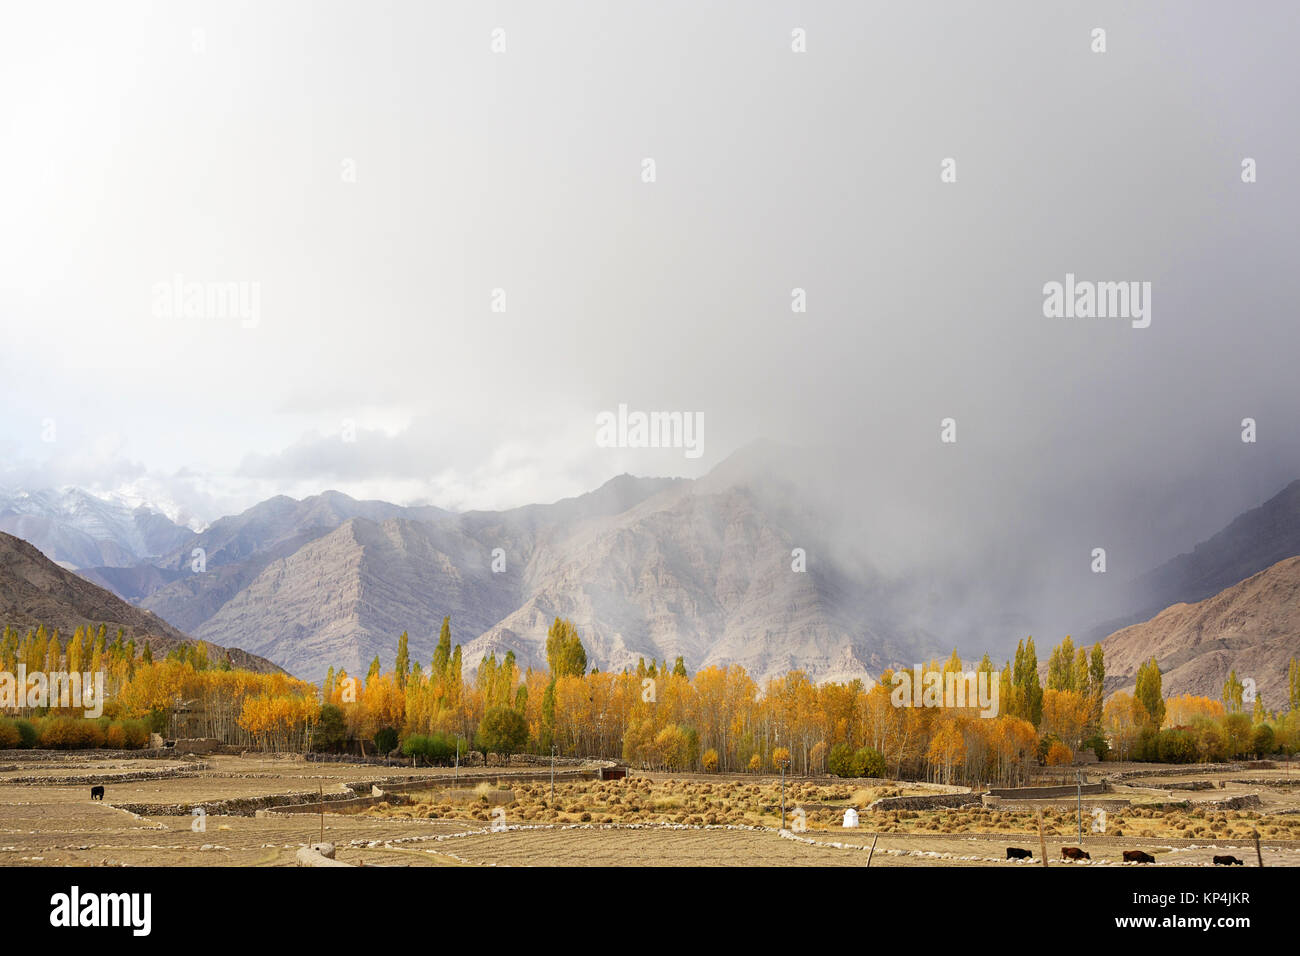 Ladakhi countryside in autumn, with trees in fall colours and himalayan mountains in the backdrop, Ladakh, Jammu and Kashmir, India. Stock Photo